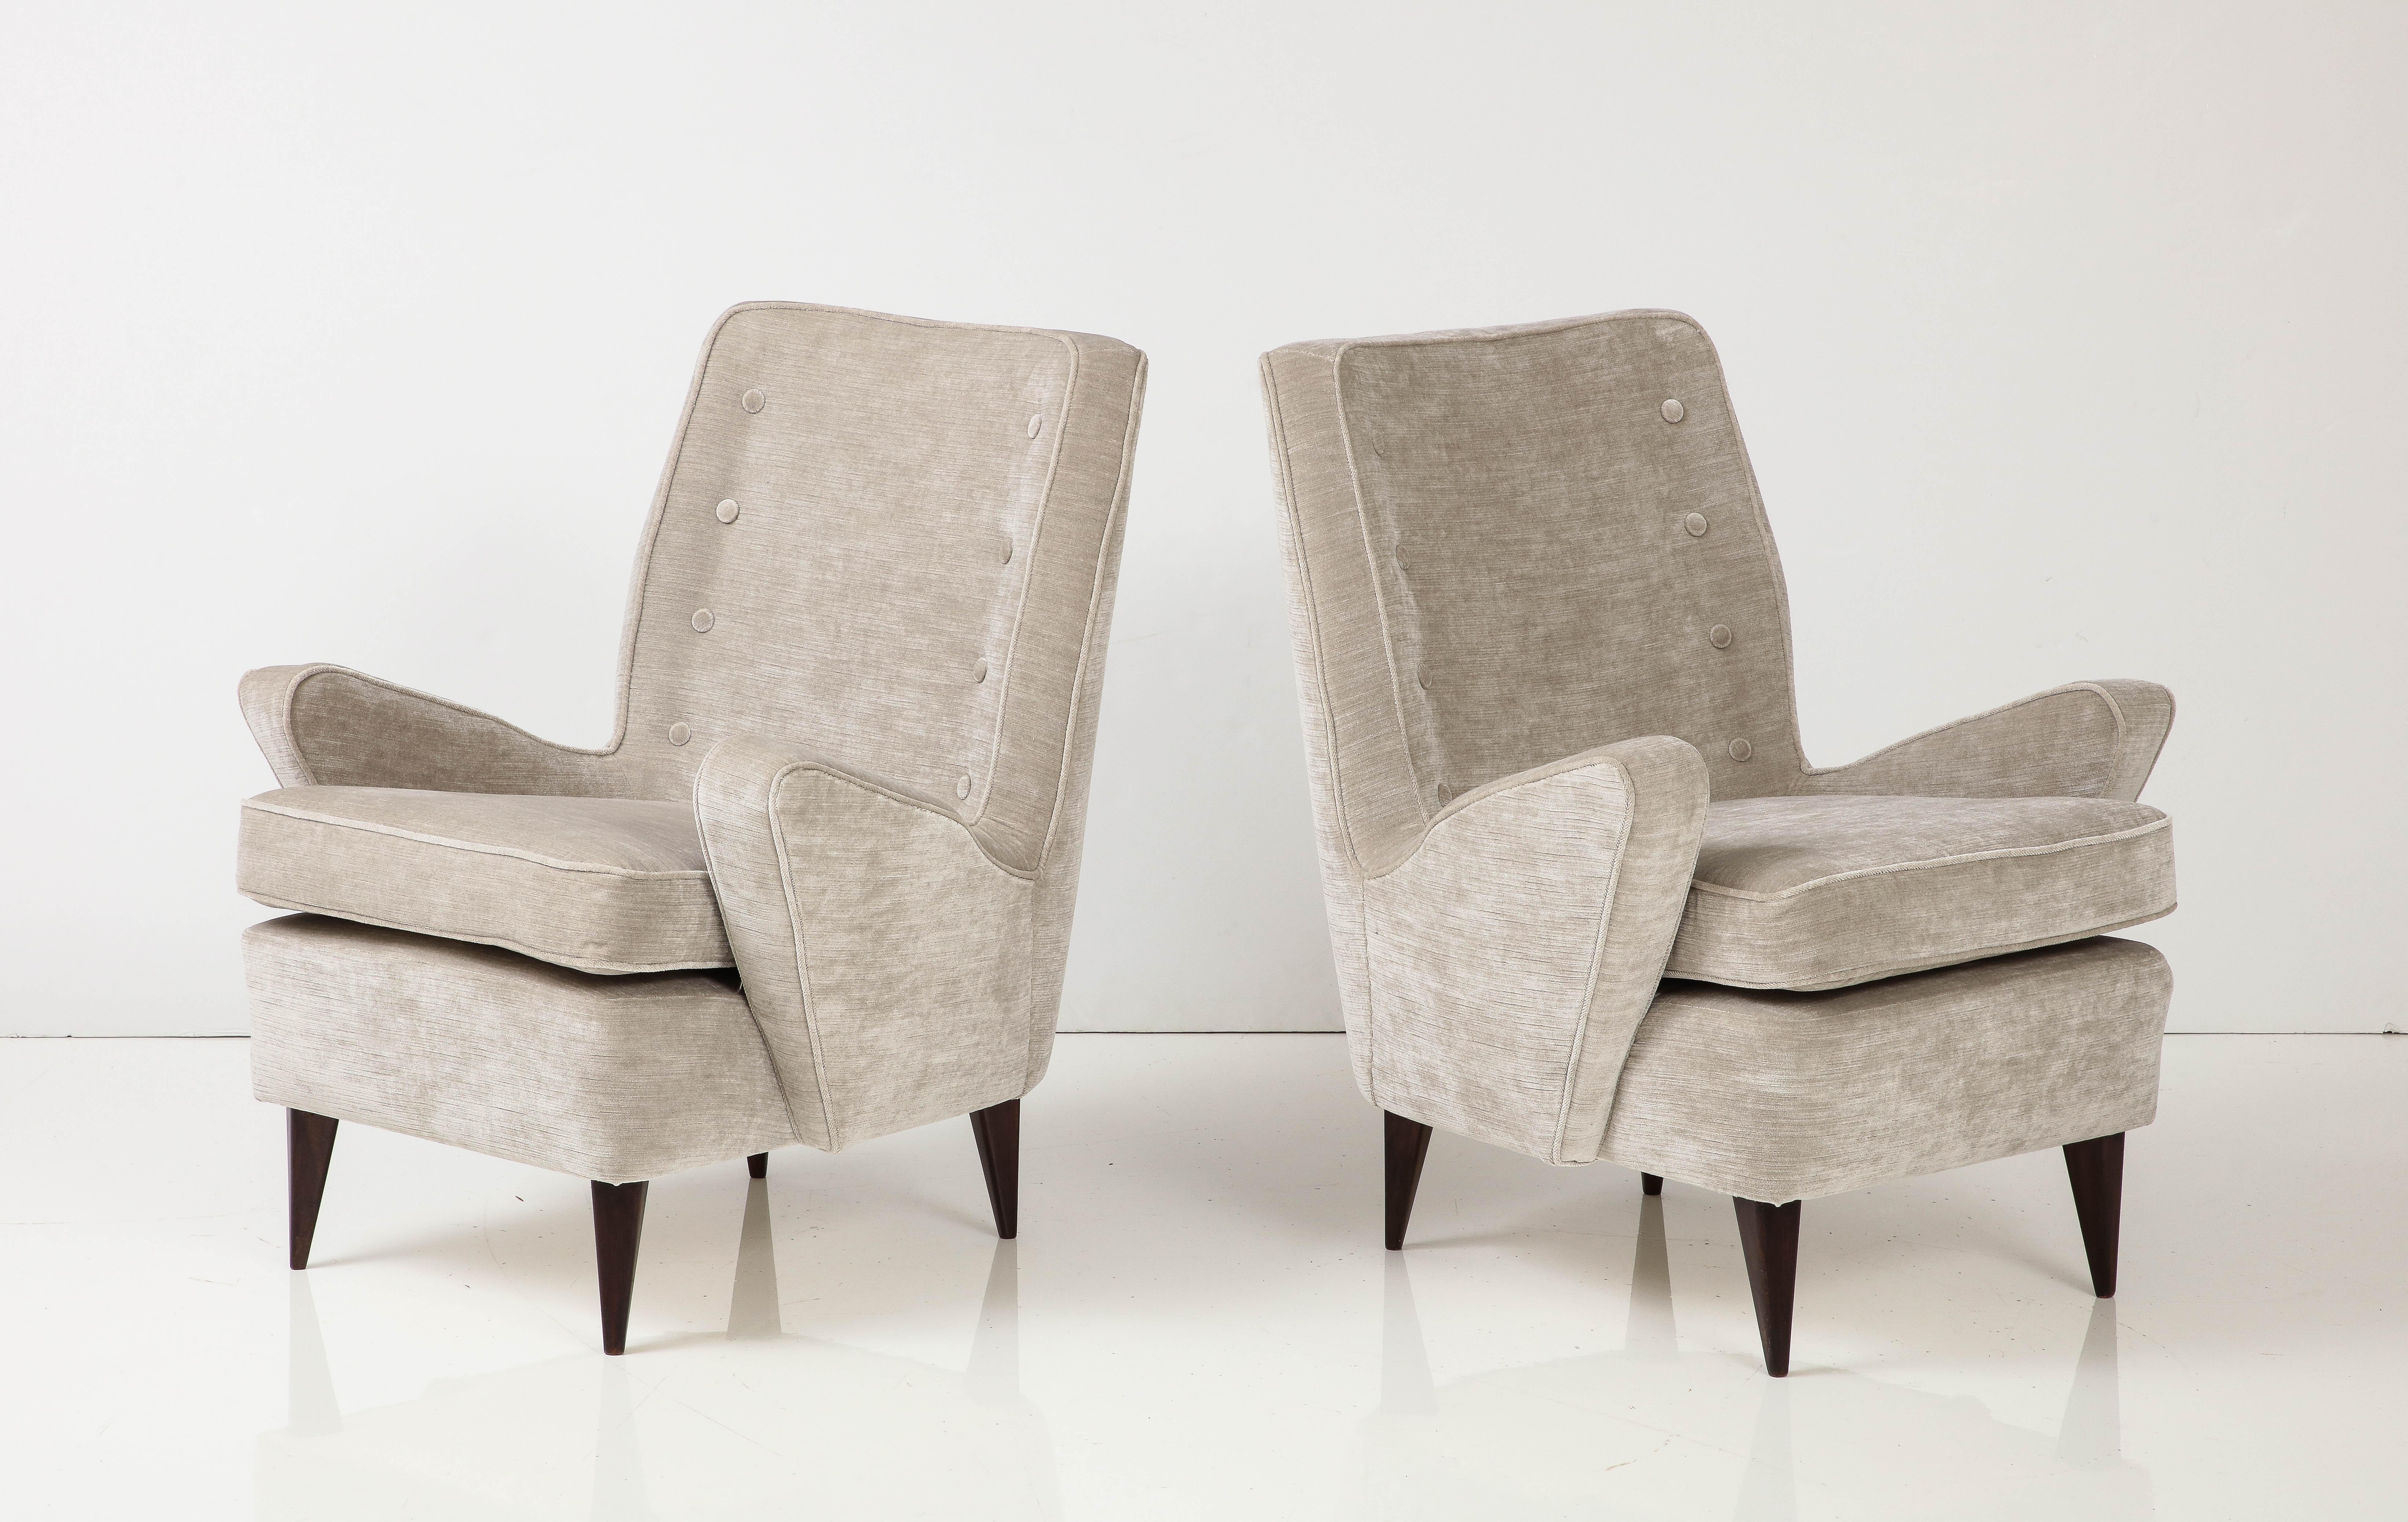 A pair of Italian midcentury lounge chairs featuring angled arms emanating from curved tight backs, each with eight tufted buttons and self welting, the seats with loose seat cushions resting on refinished wood legs newly, upholstered in greige